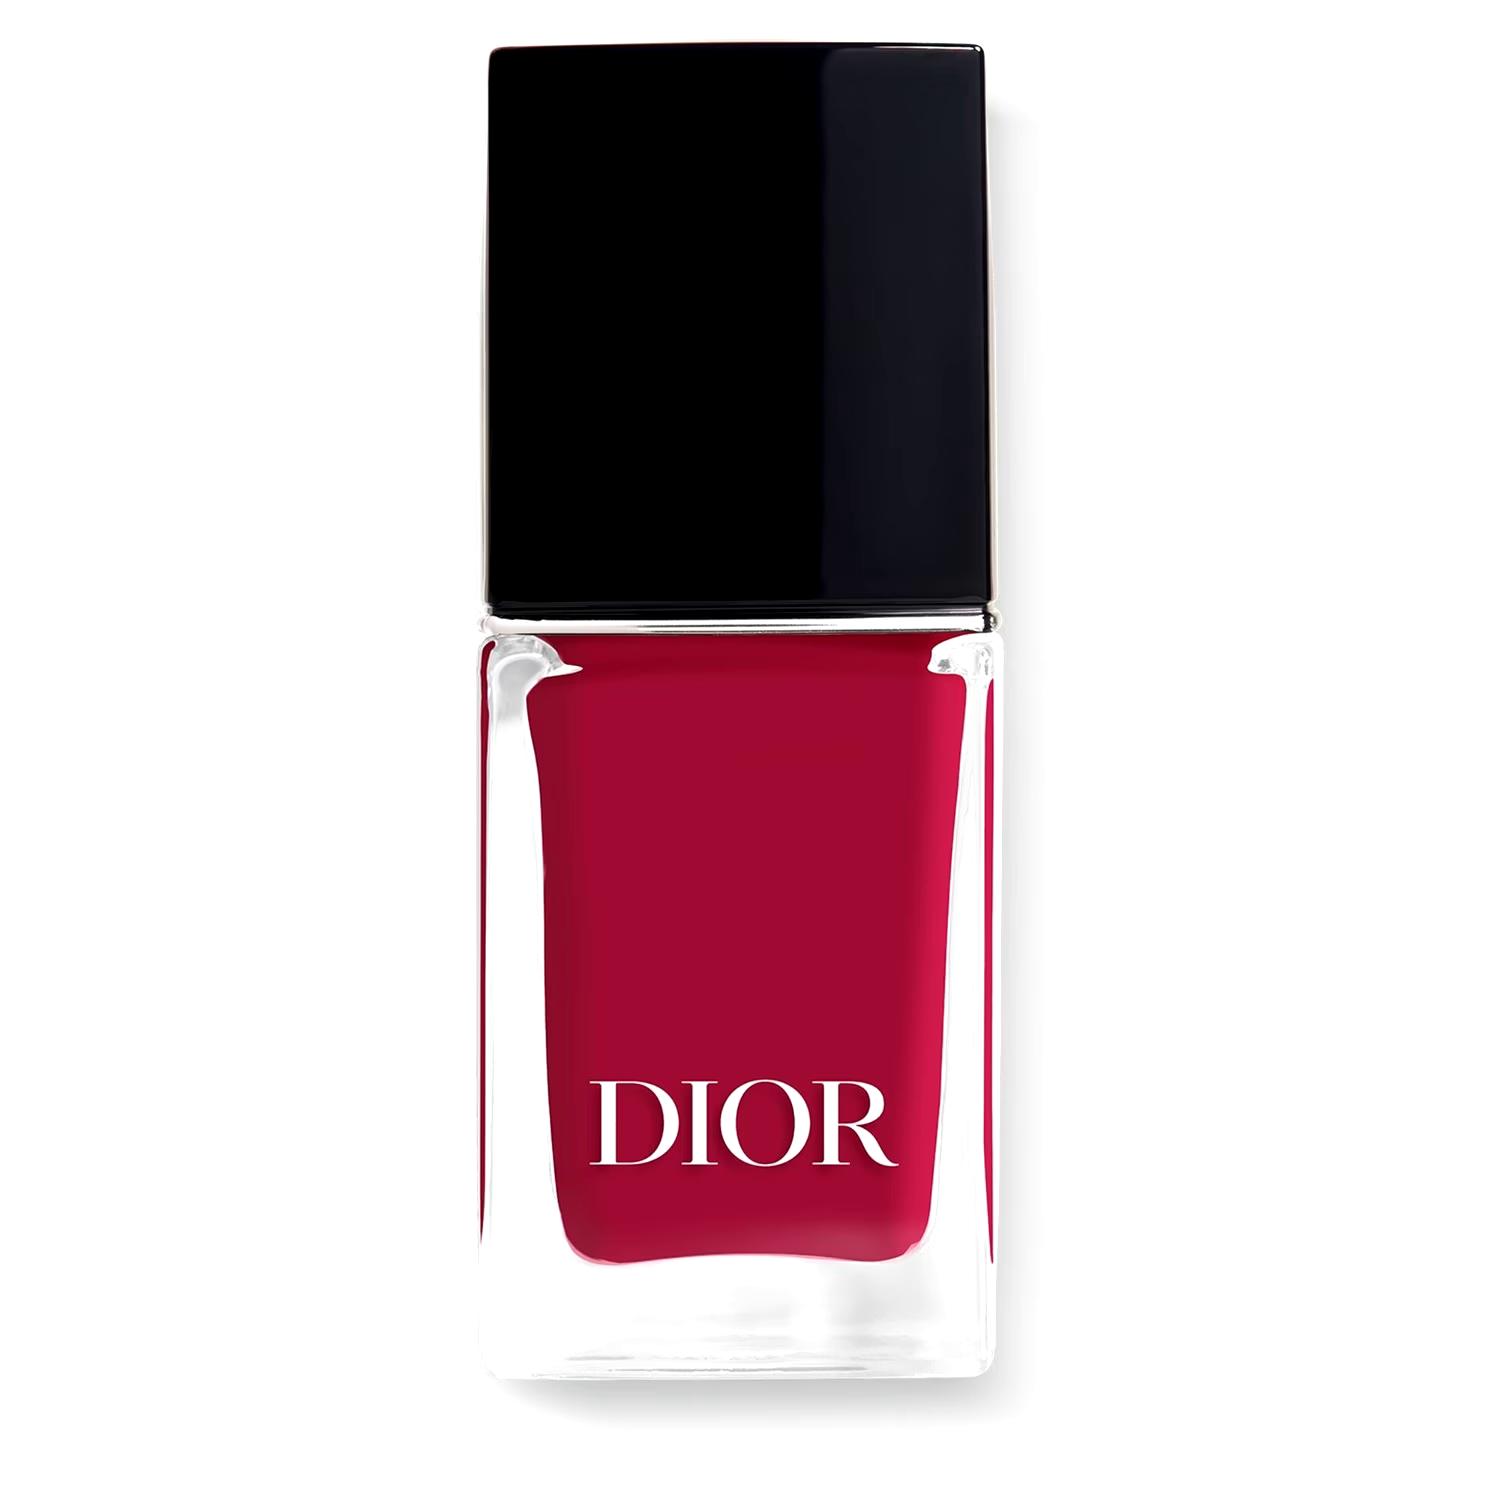 Dior vernis nail polish with gel effect and couture color